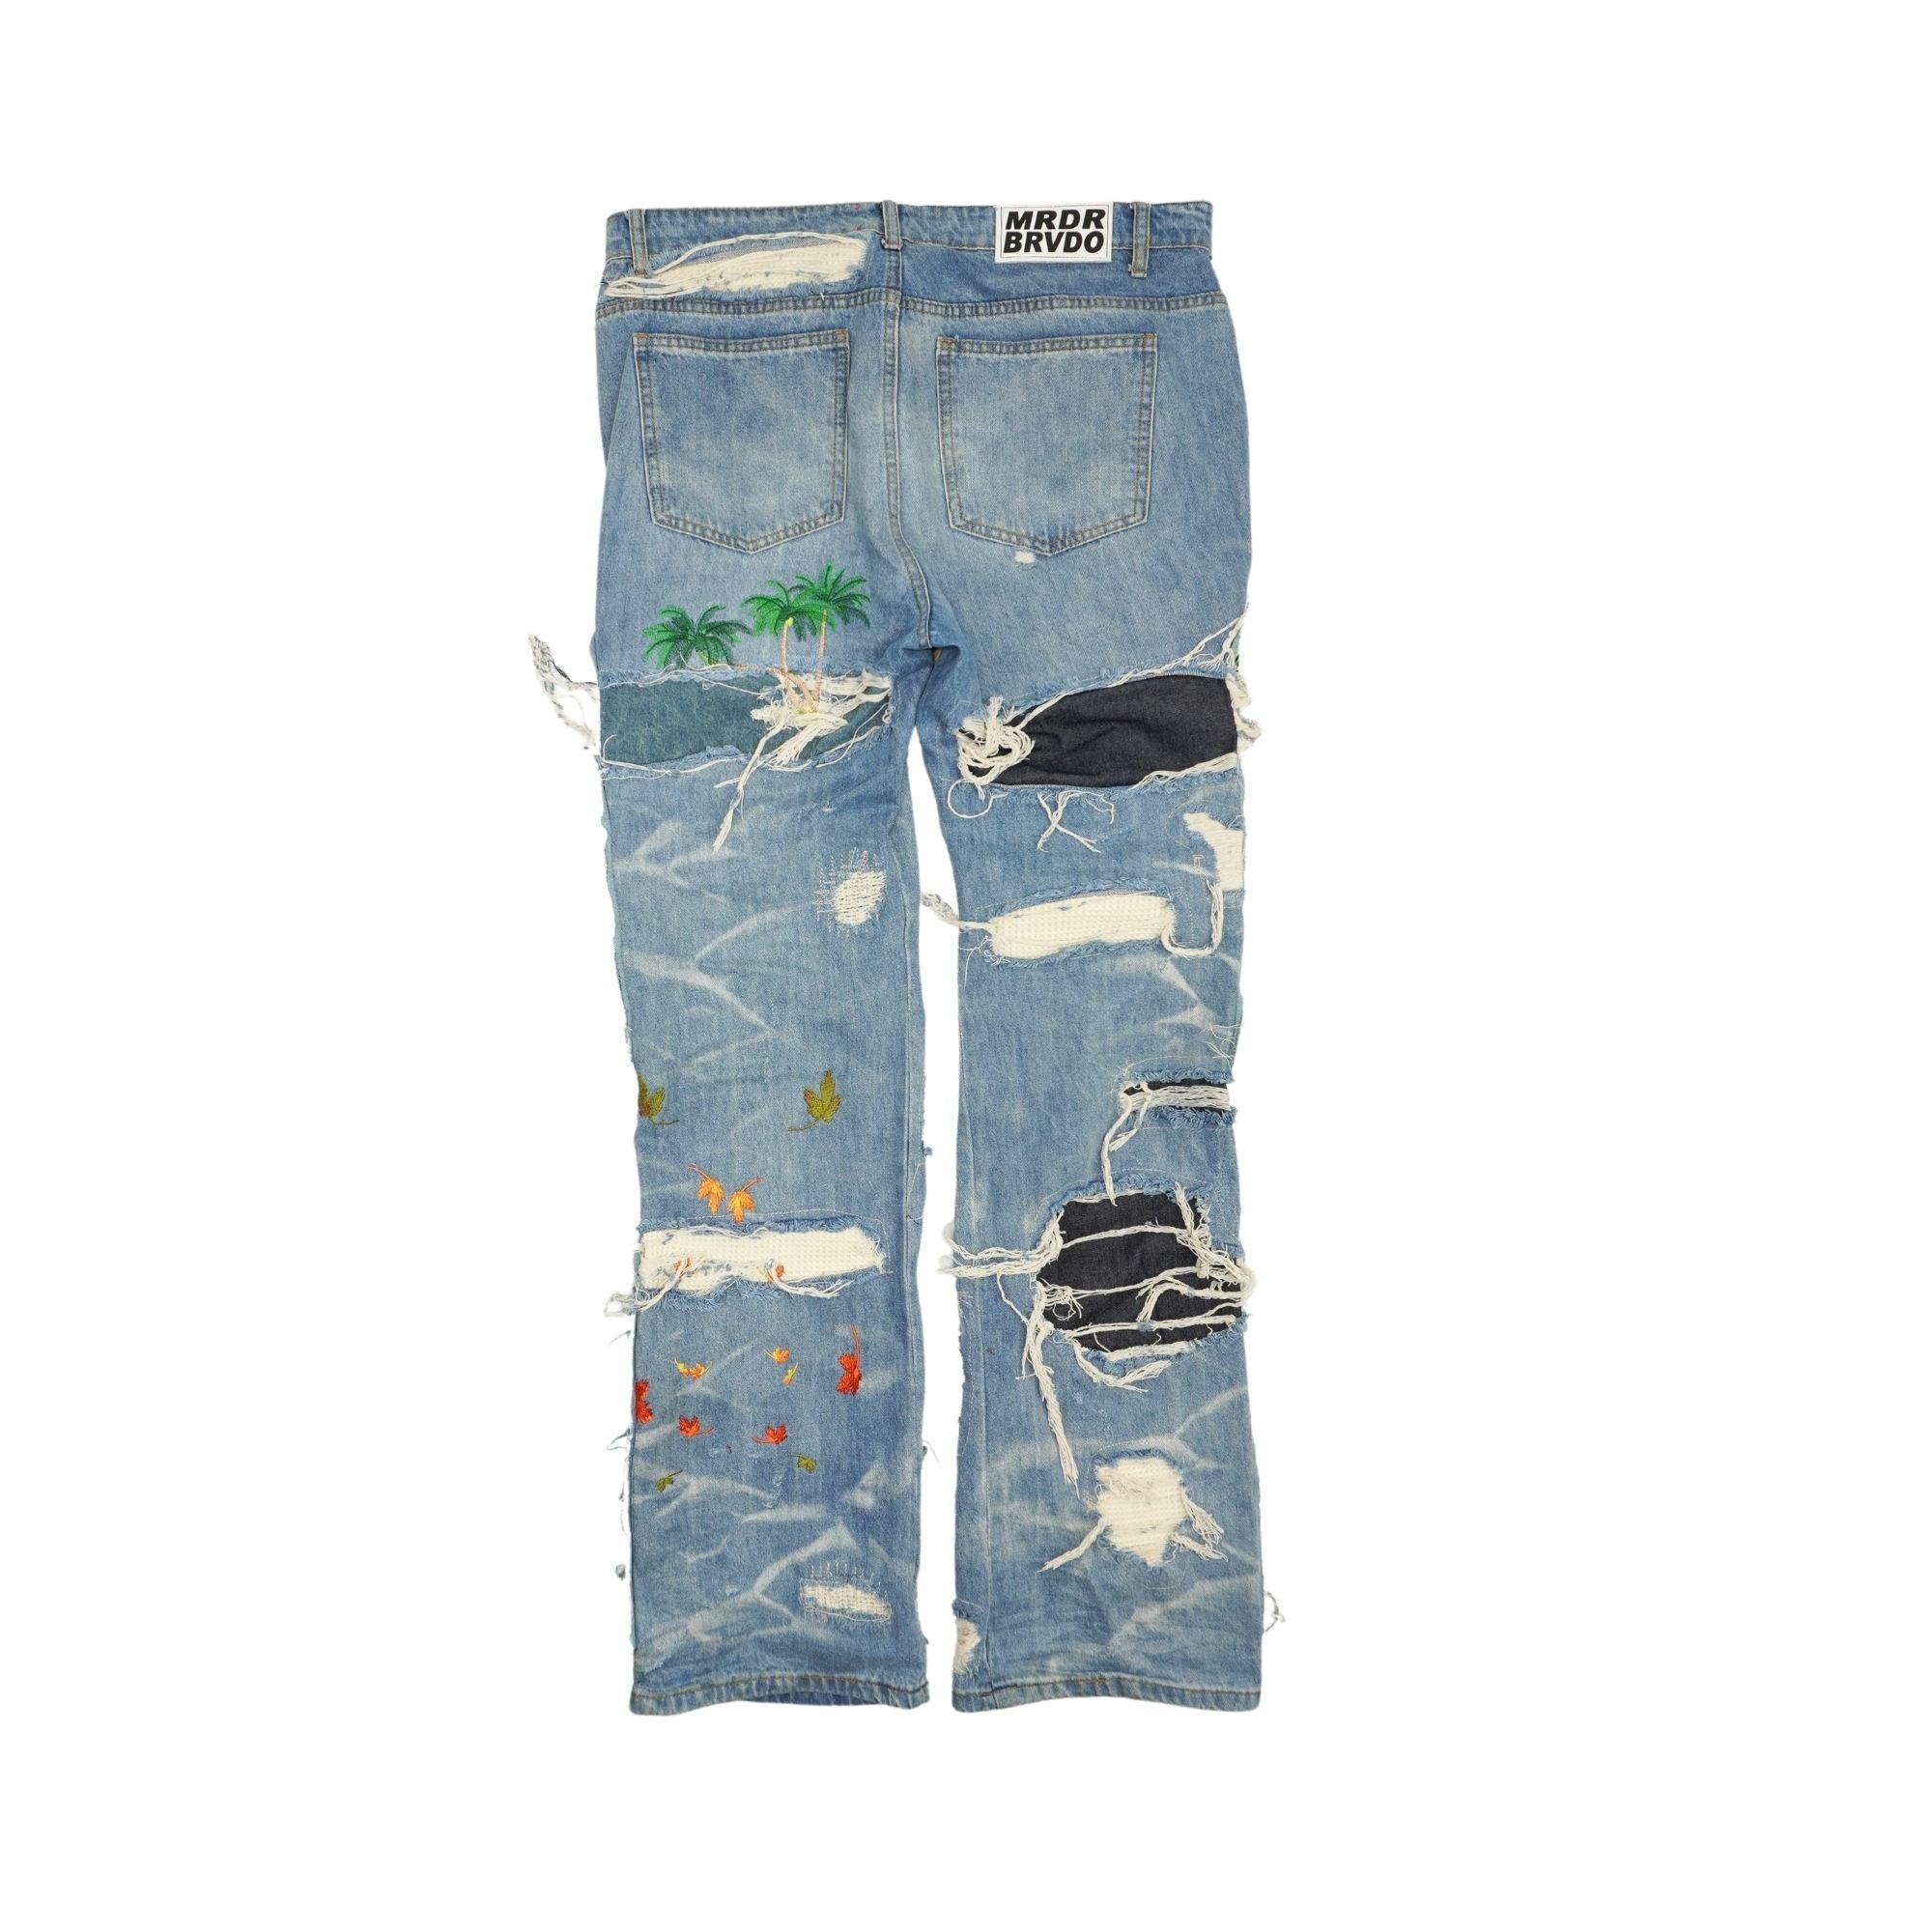 Who Decides War Jeans - Men's 36 - Fashionably Yours